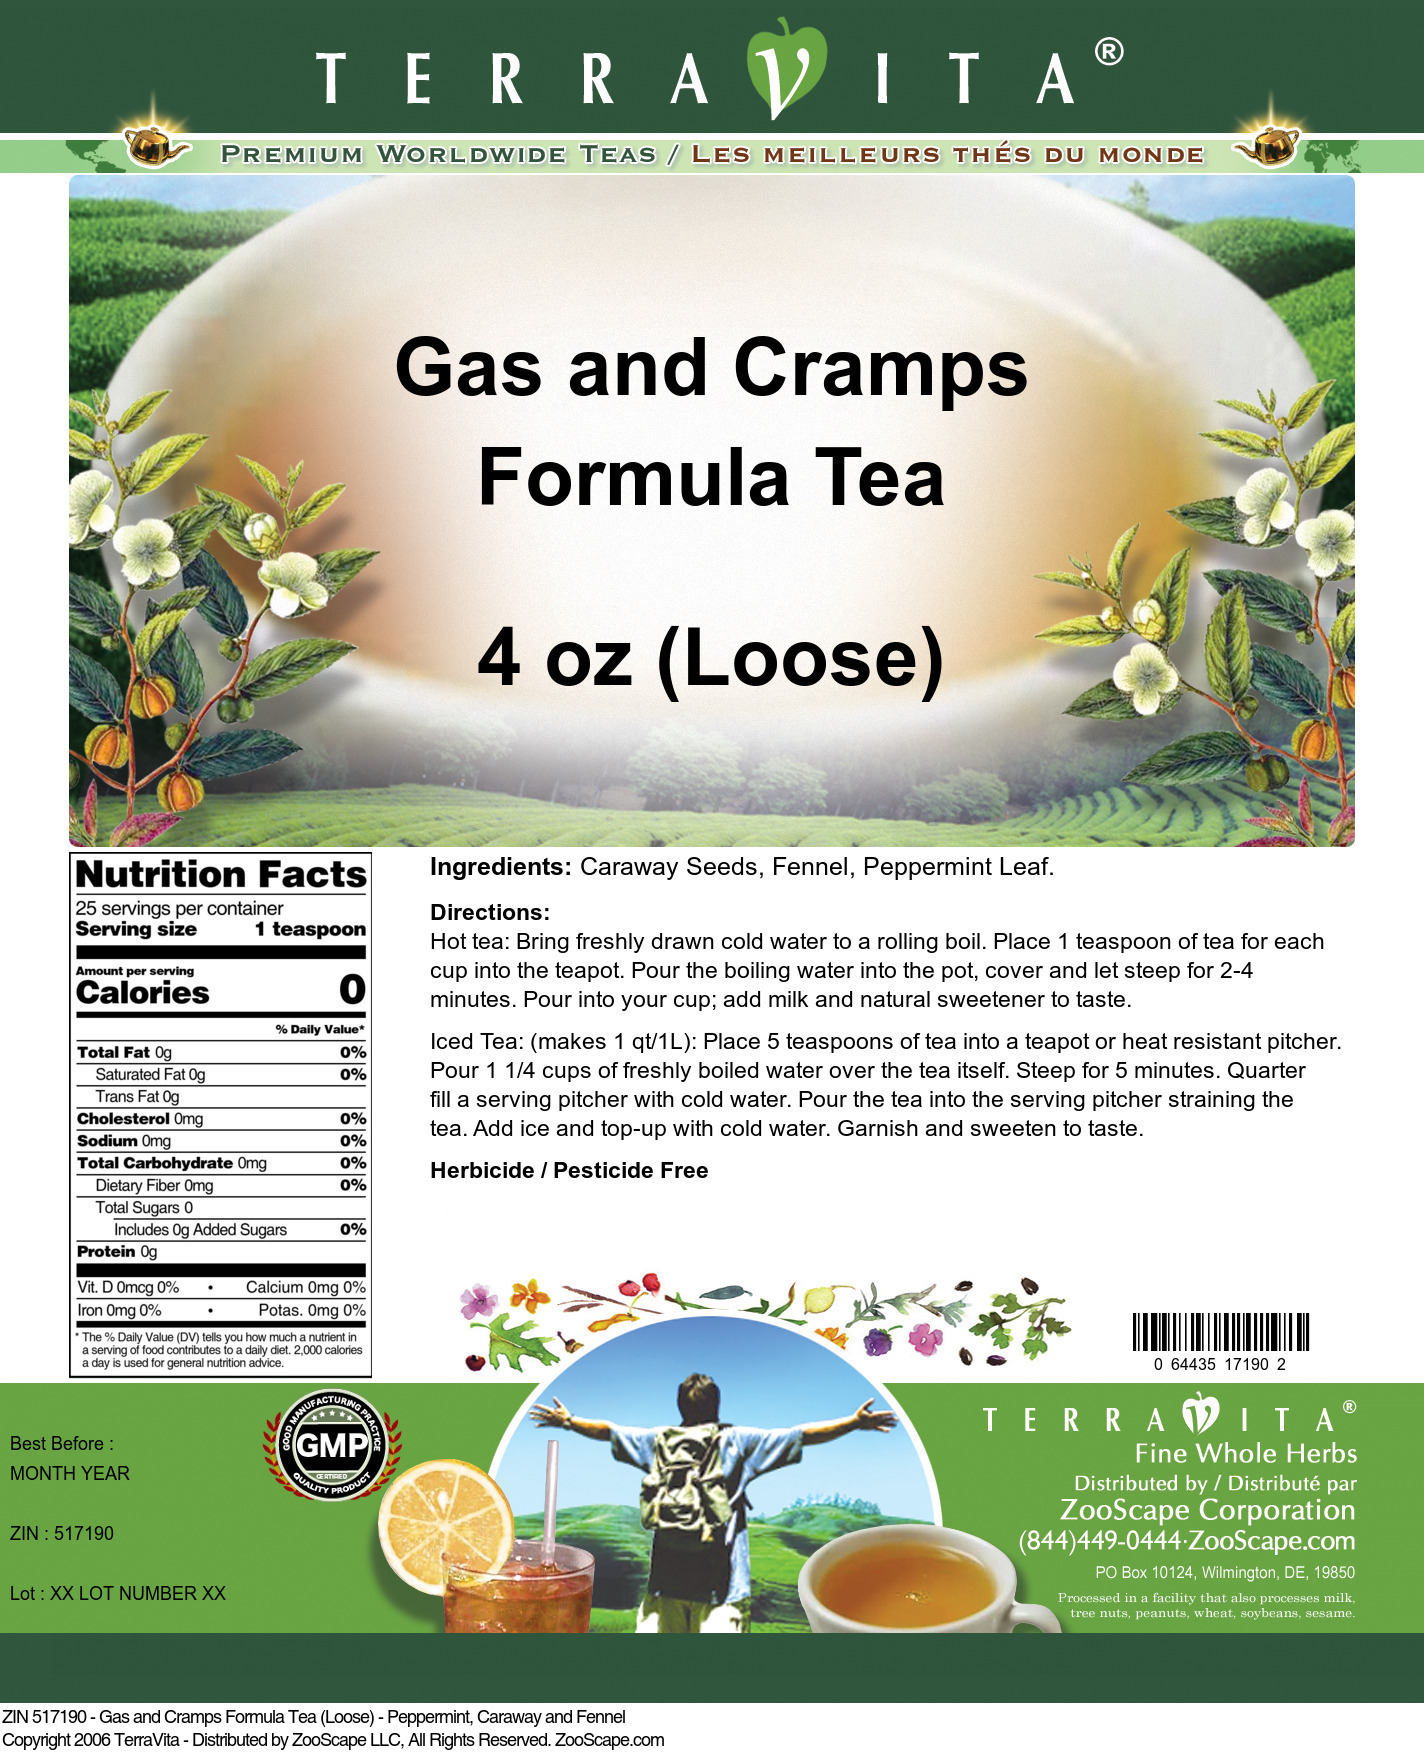 Gas and Cramps Formula Tea (Loose) - Peppermint, Caraway and Fennel - Label